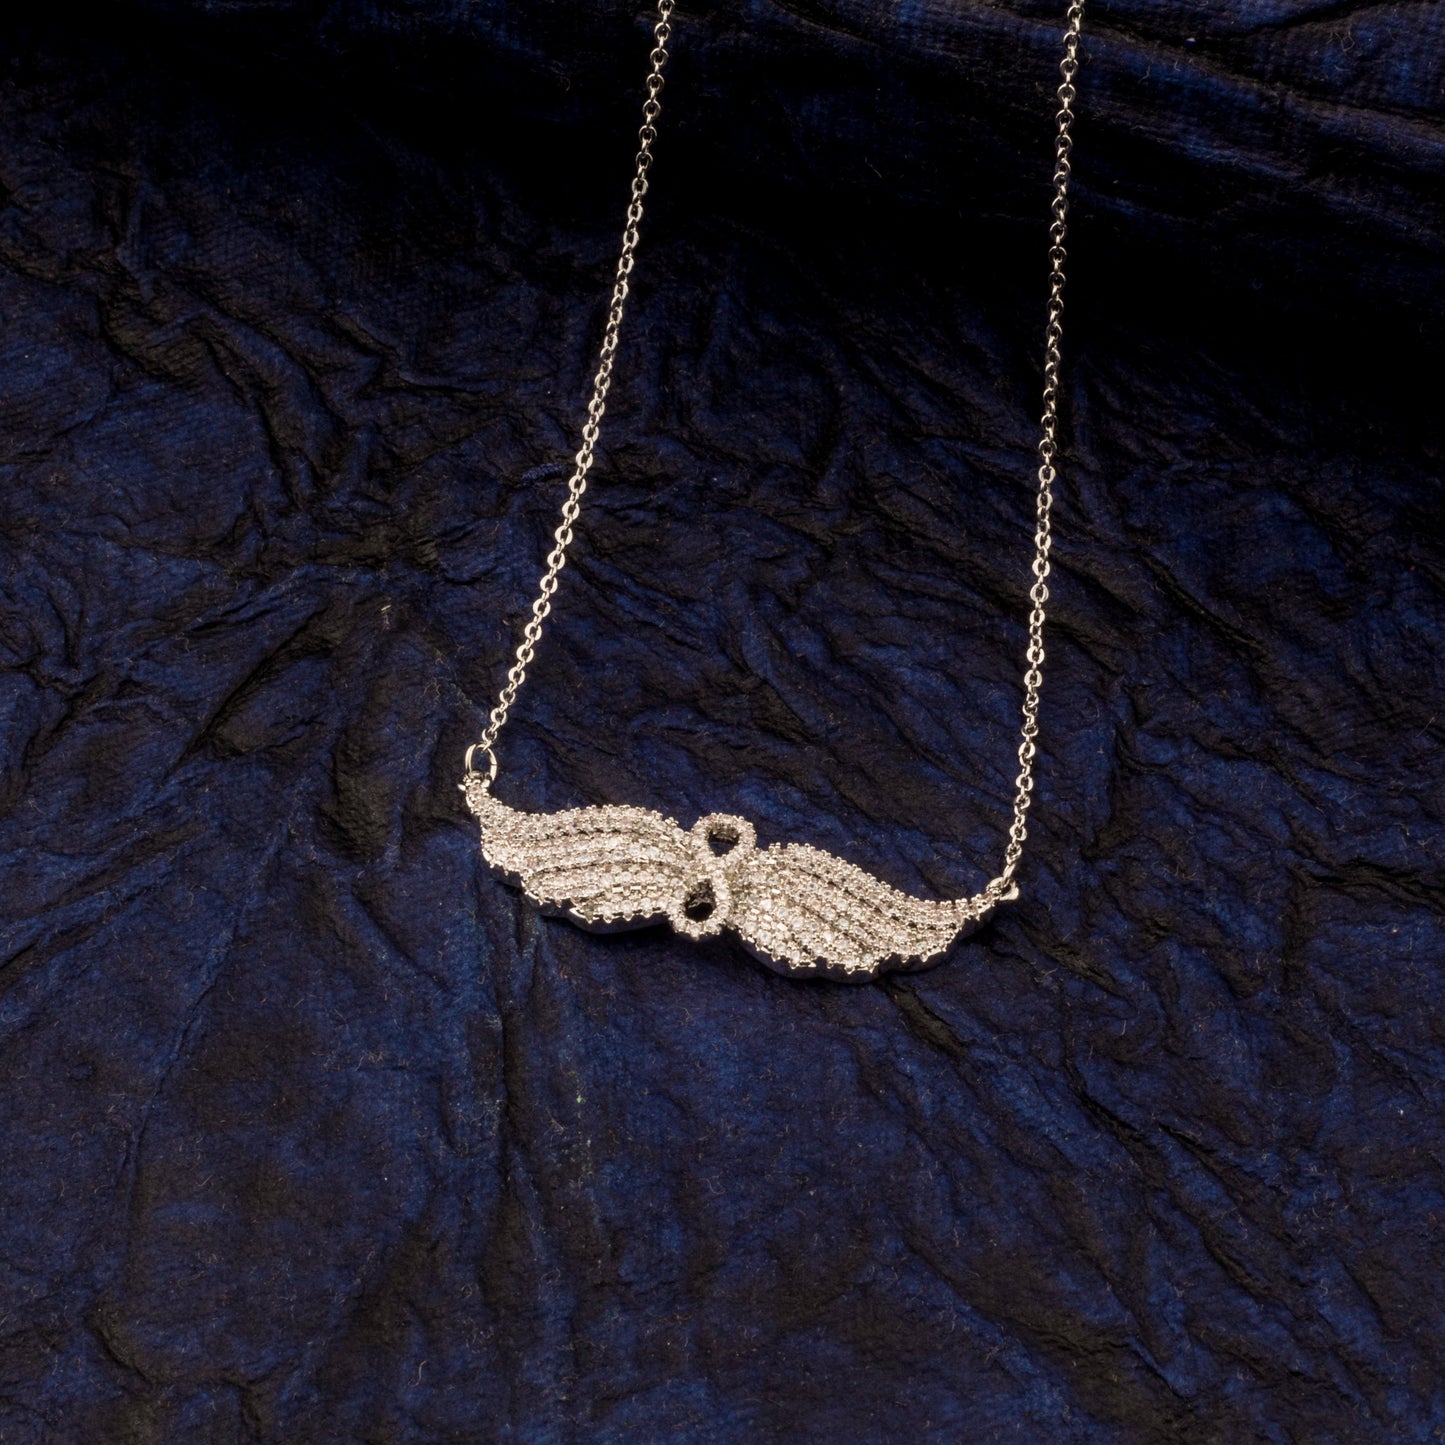 Sterling Silver Plated CZ Studded Valentine Romantic Angel Wings and Infinity Pendant for Girls, Teens & Women (MD_2054)